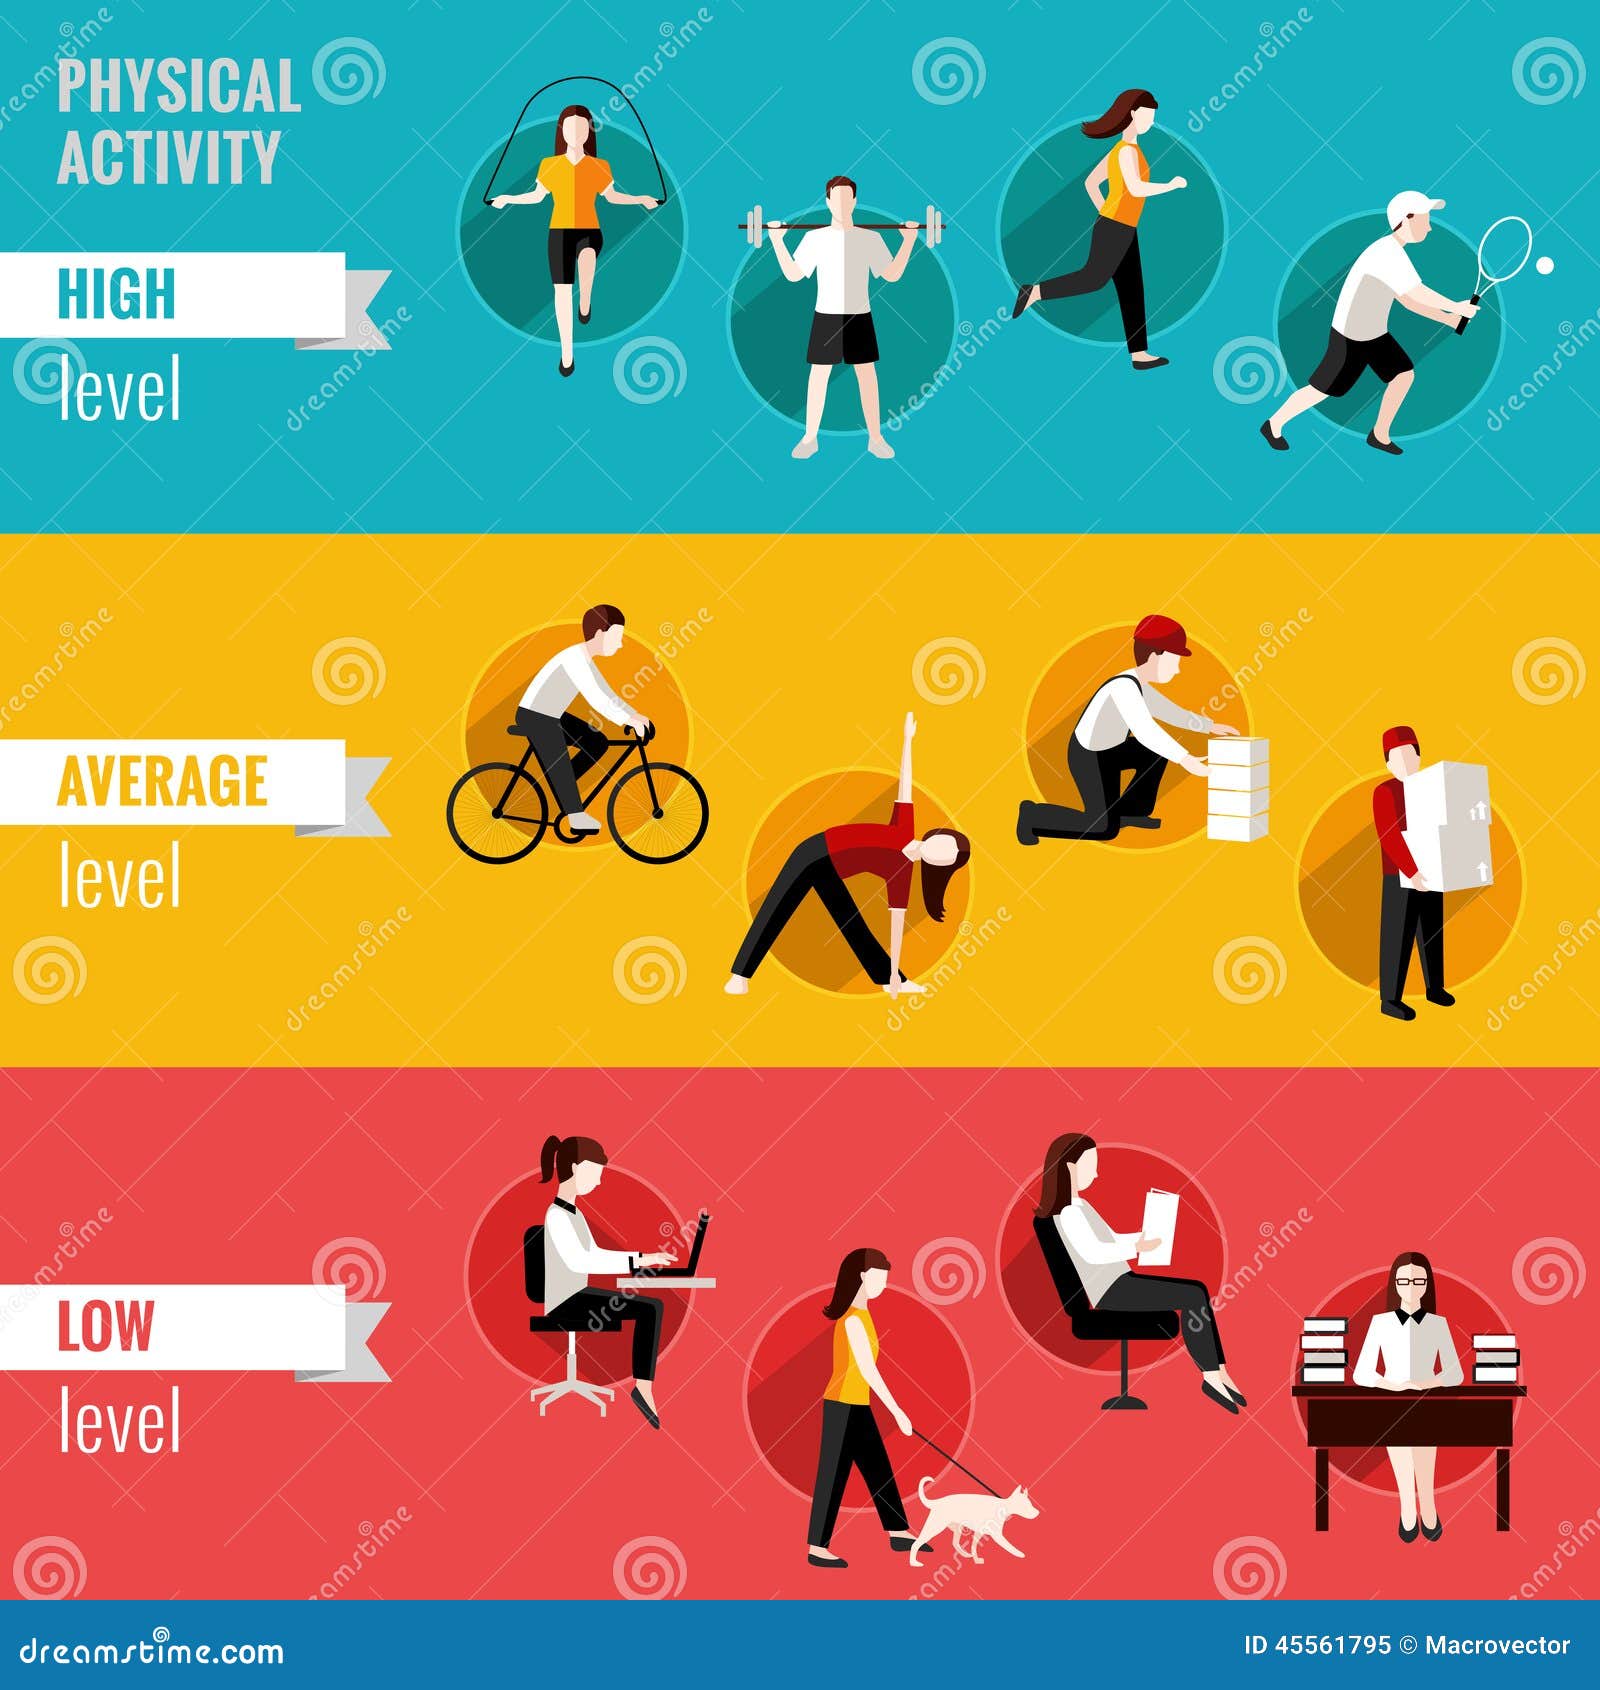 physical activity horizontal banners